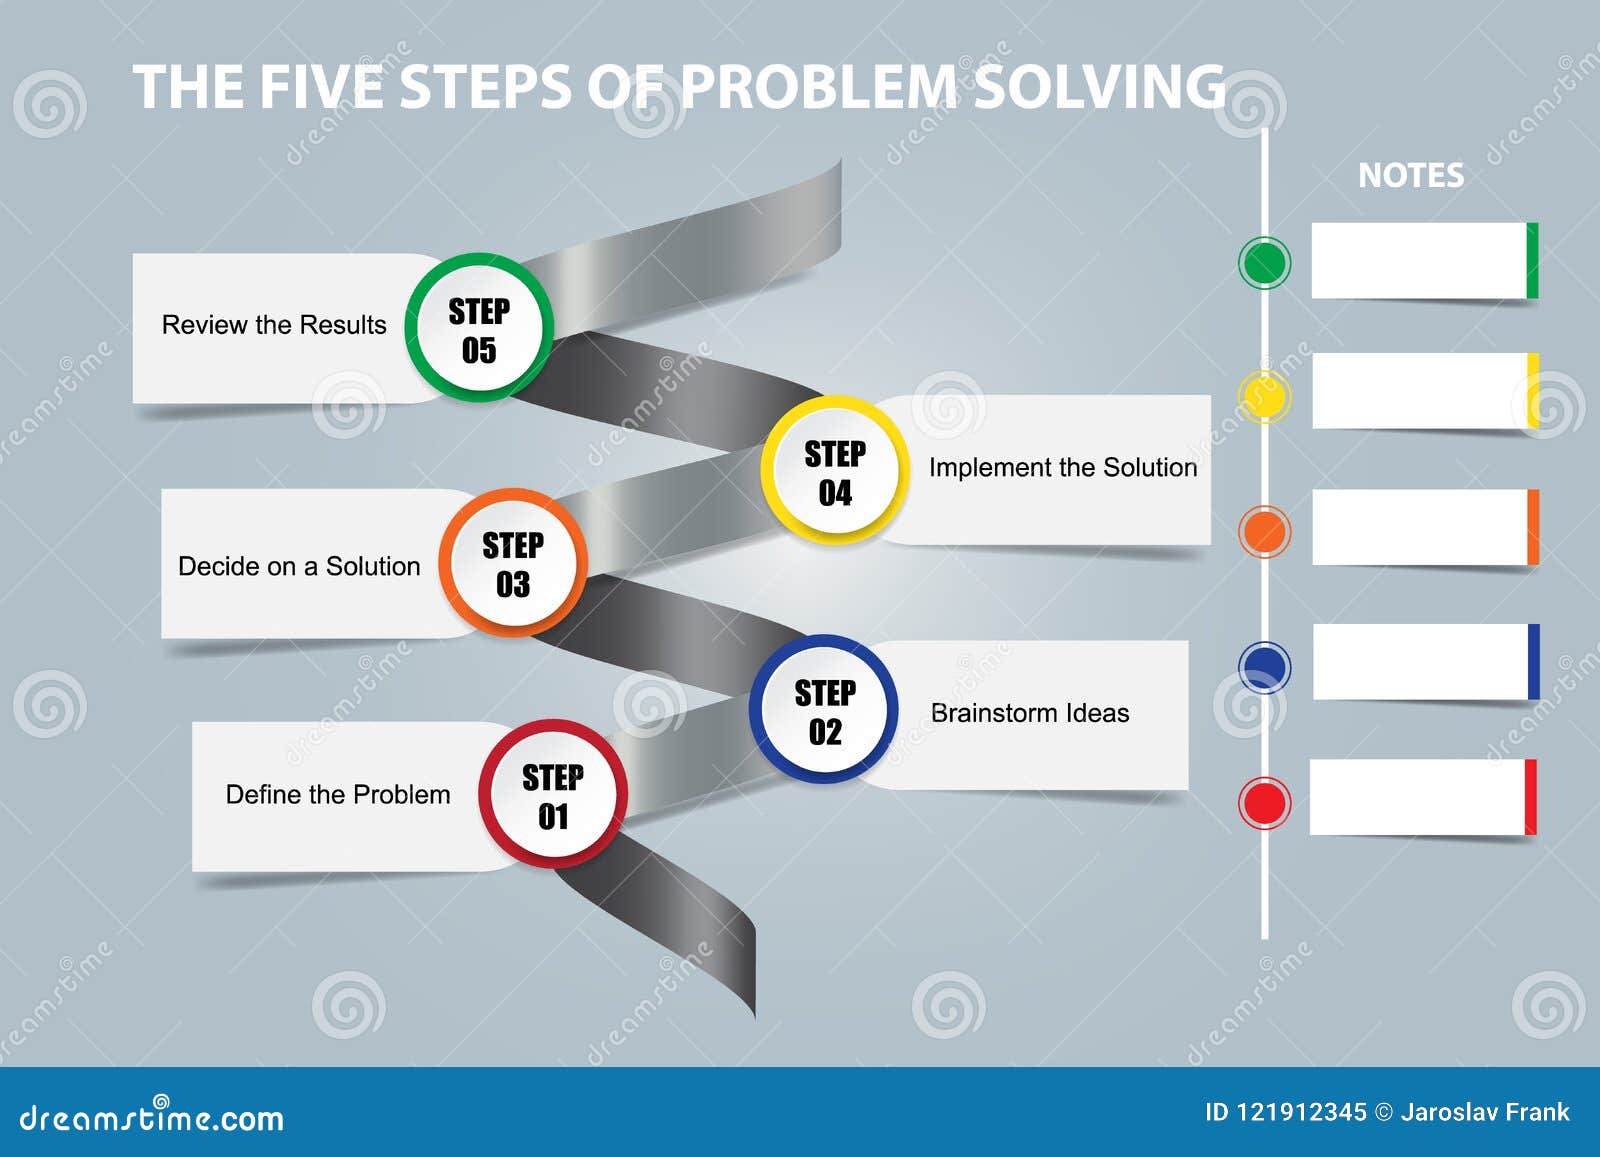 five definitions of problem solving